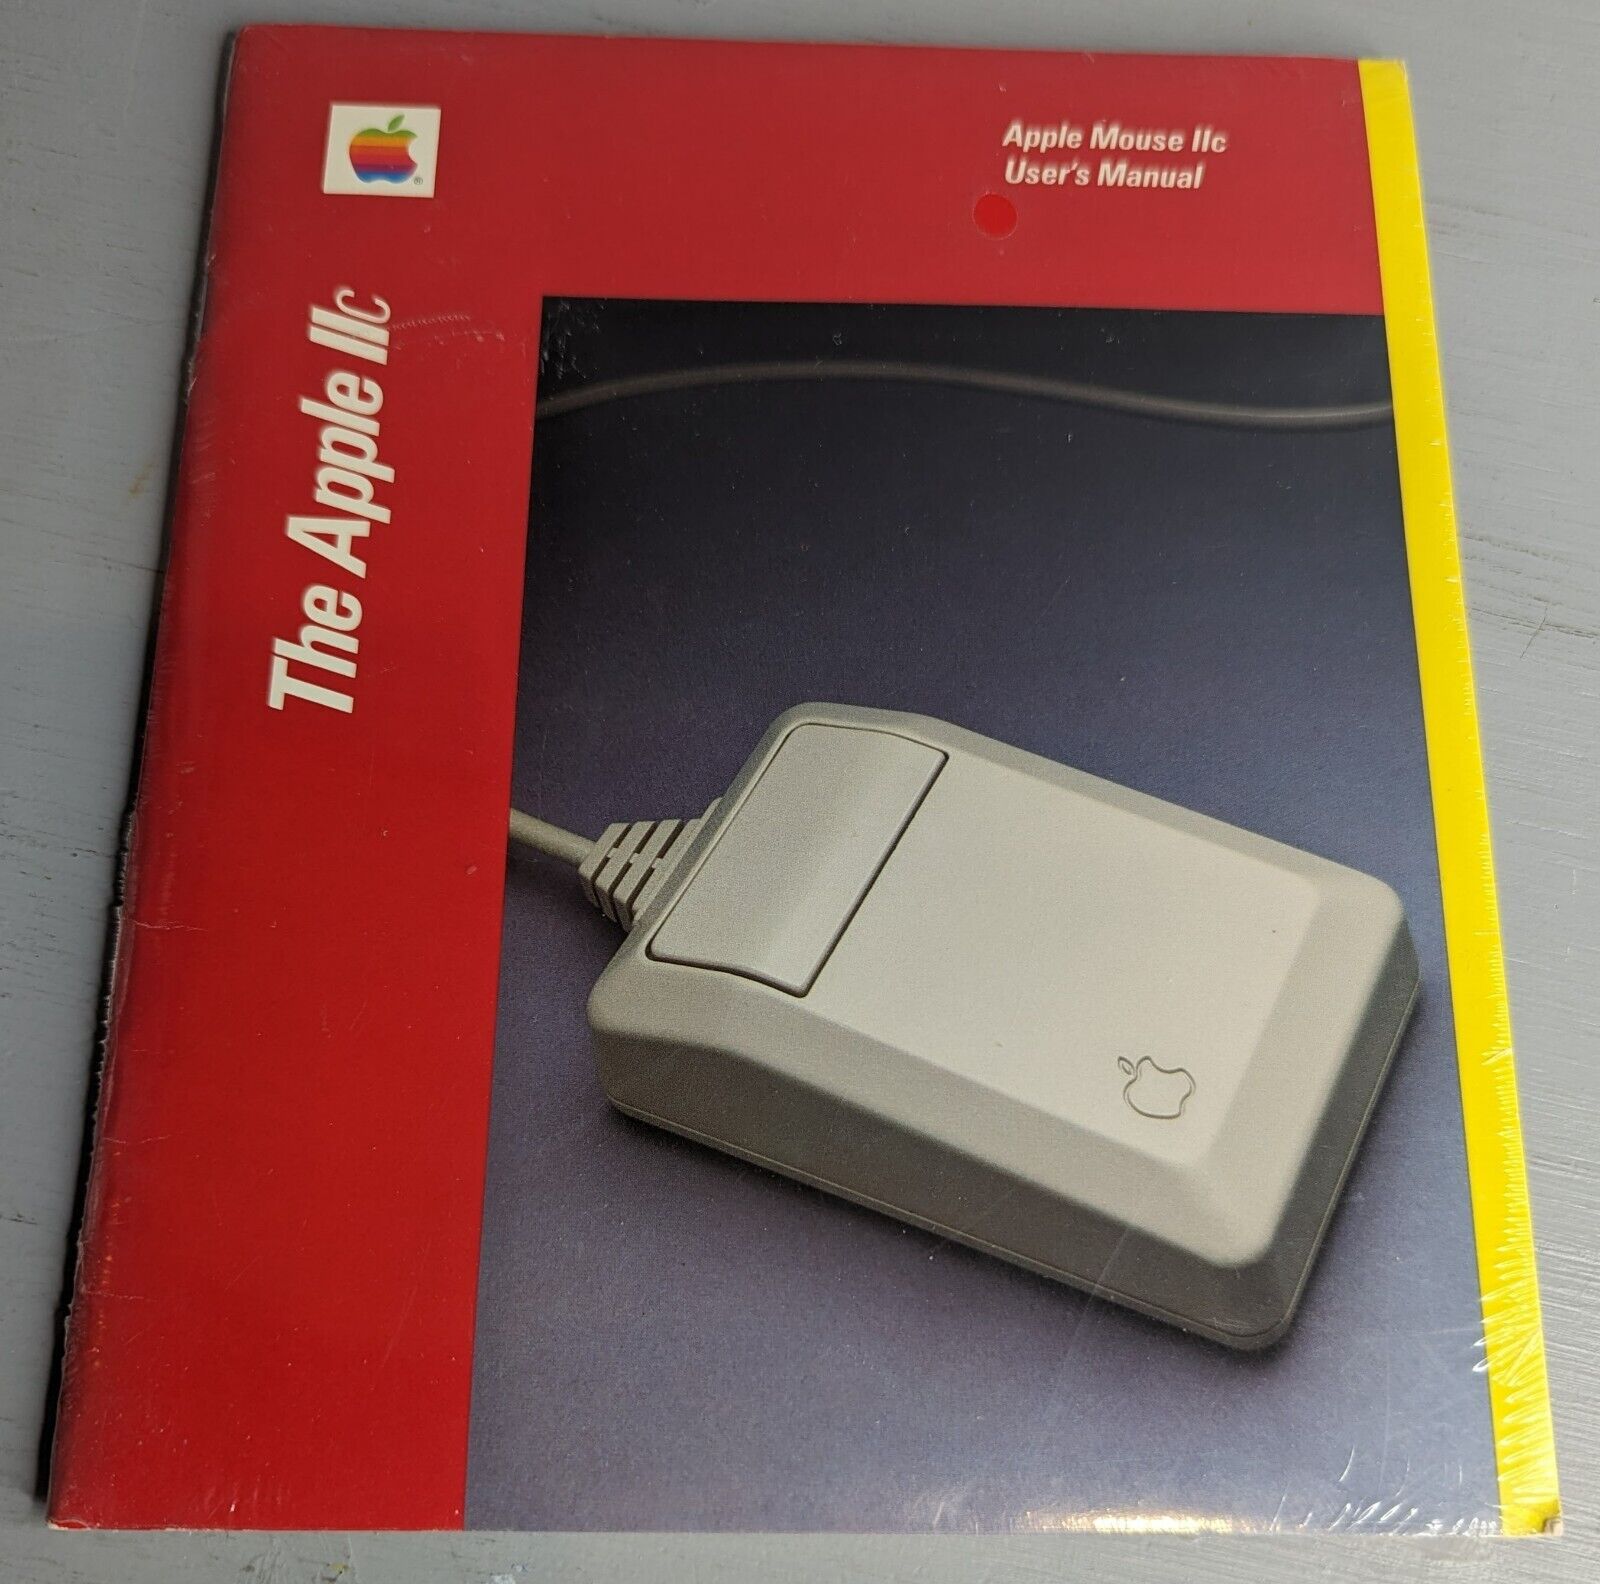 vintage Apple Mouse IIc User\'s Manual 030-0961-A still in shrink